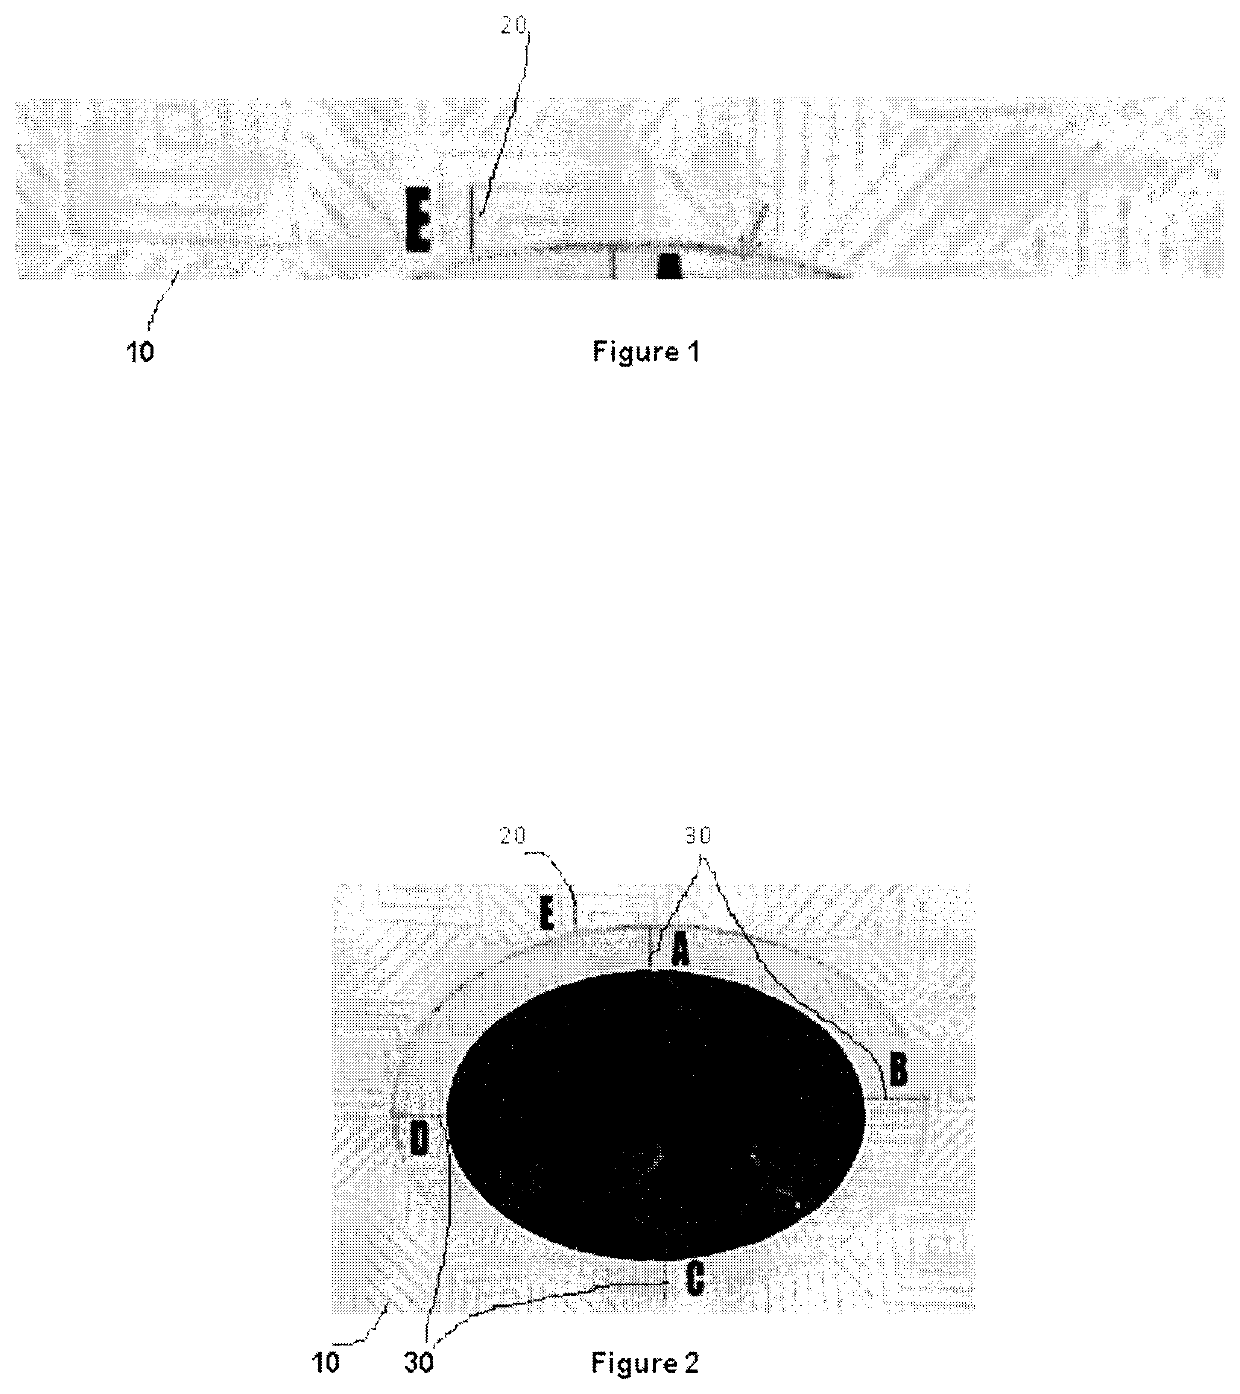 Method for making window, embedded watermark and other integrated security features in a thermoplastic security document